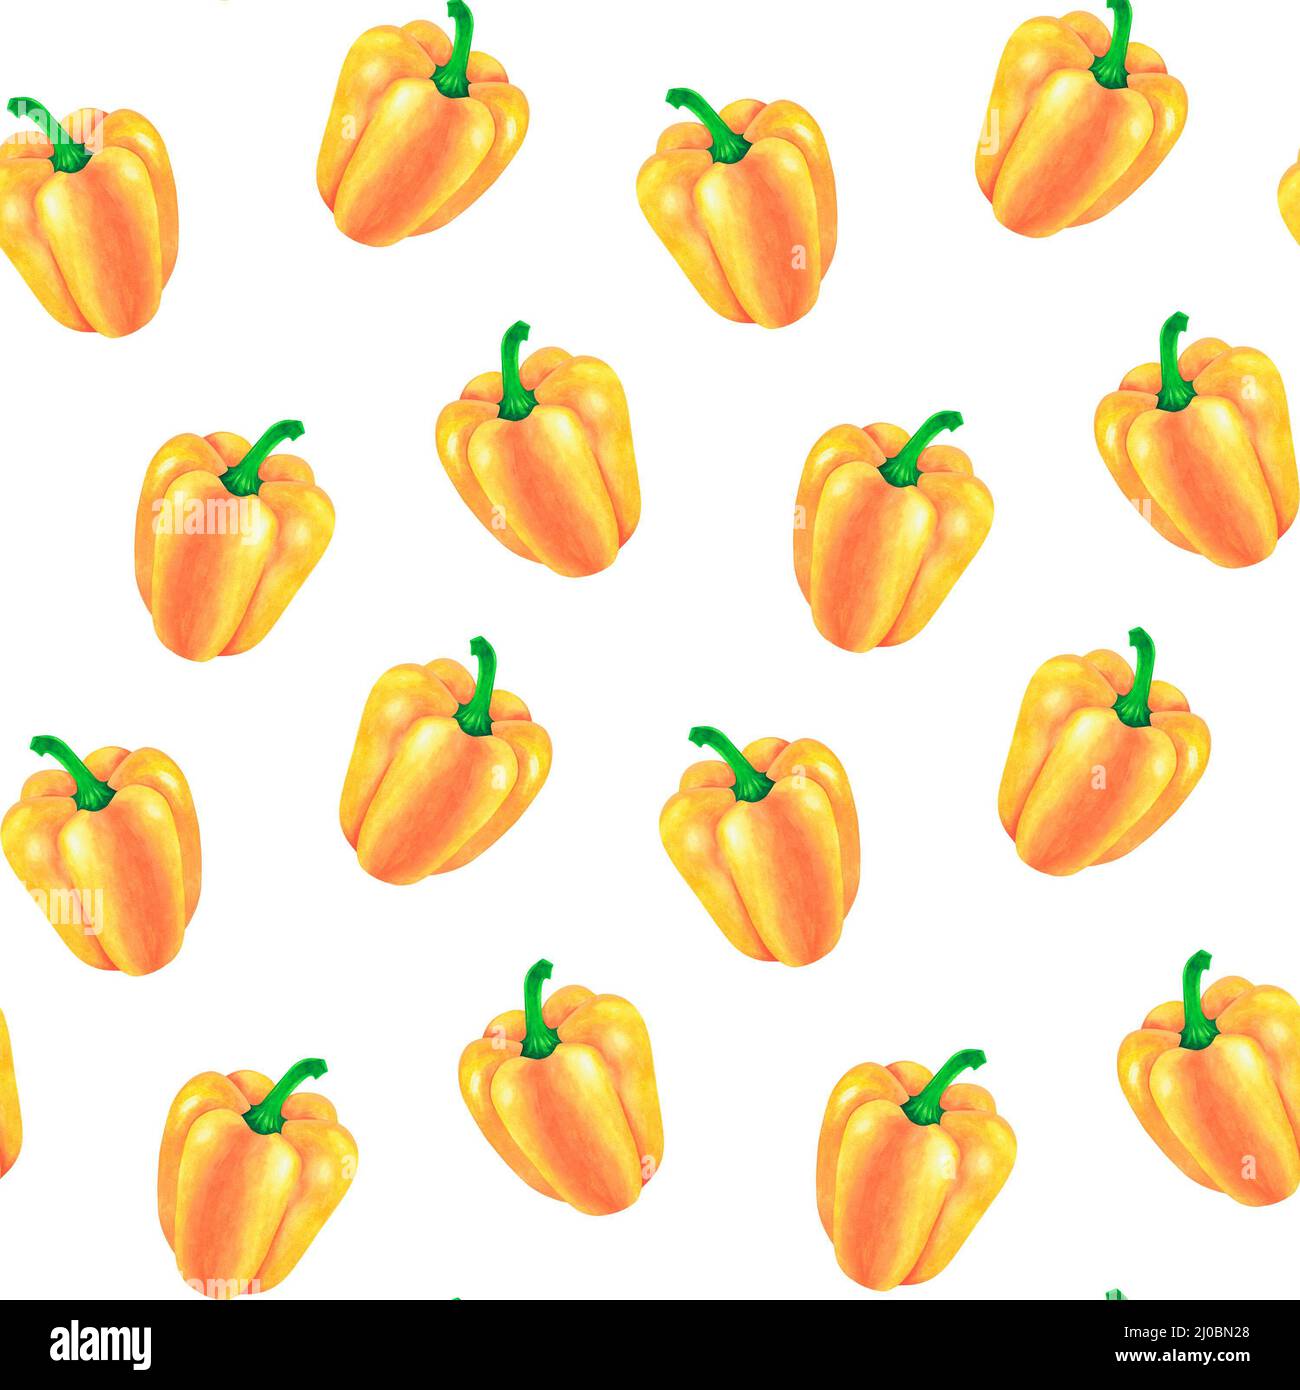 Seamless pattern. Yellow Bell pepper. Watercolor illustration. Isolated on a white background. For your design cookbooks, recipes, aprons. Stock Photo